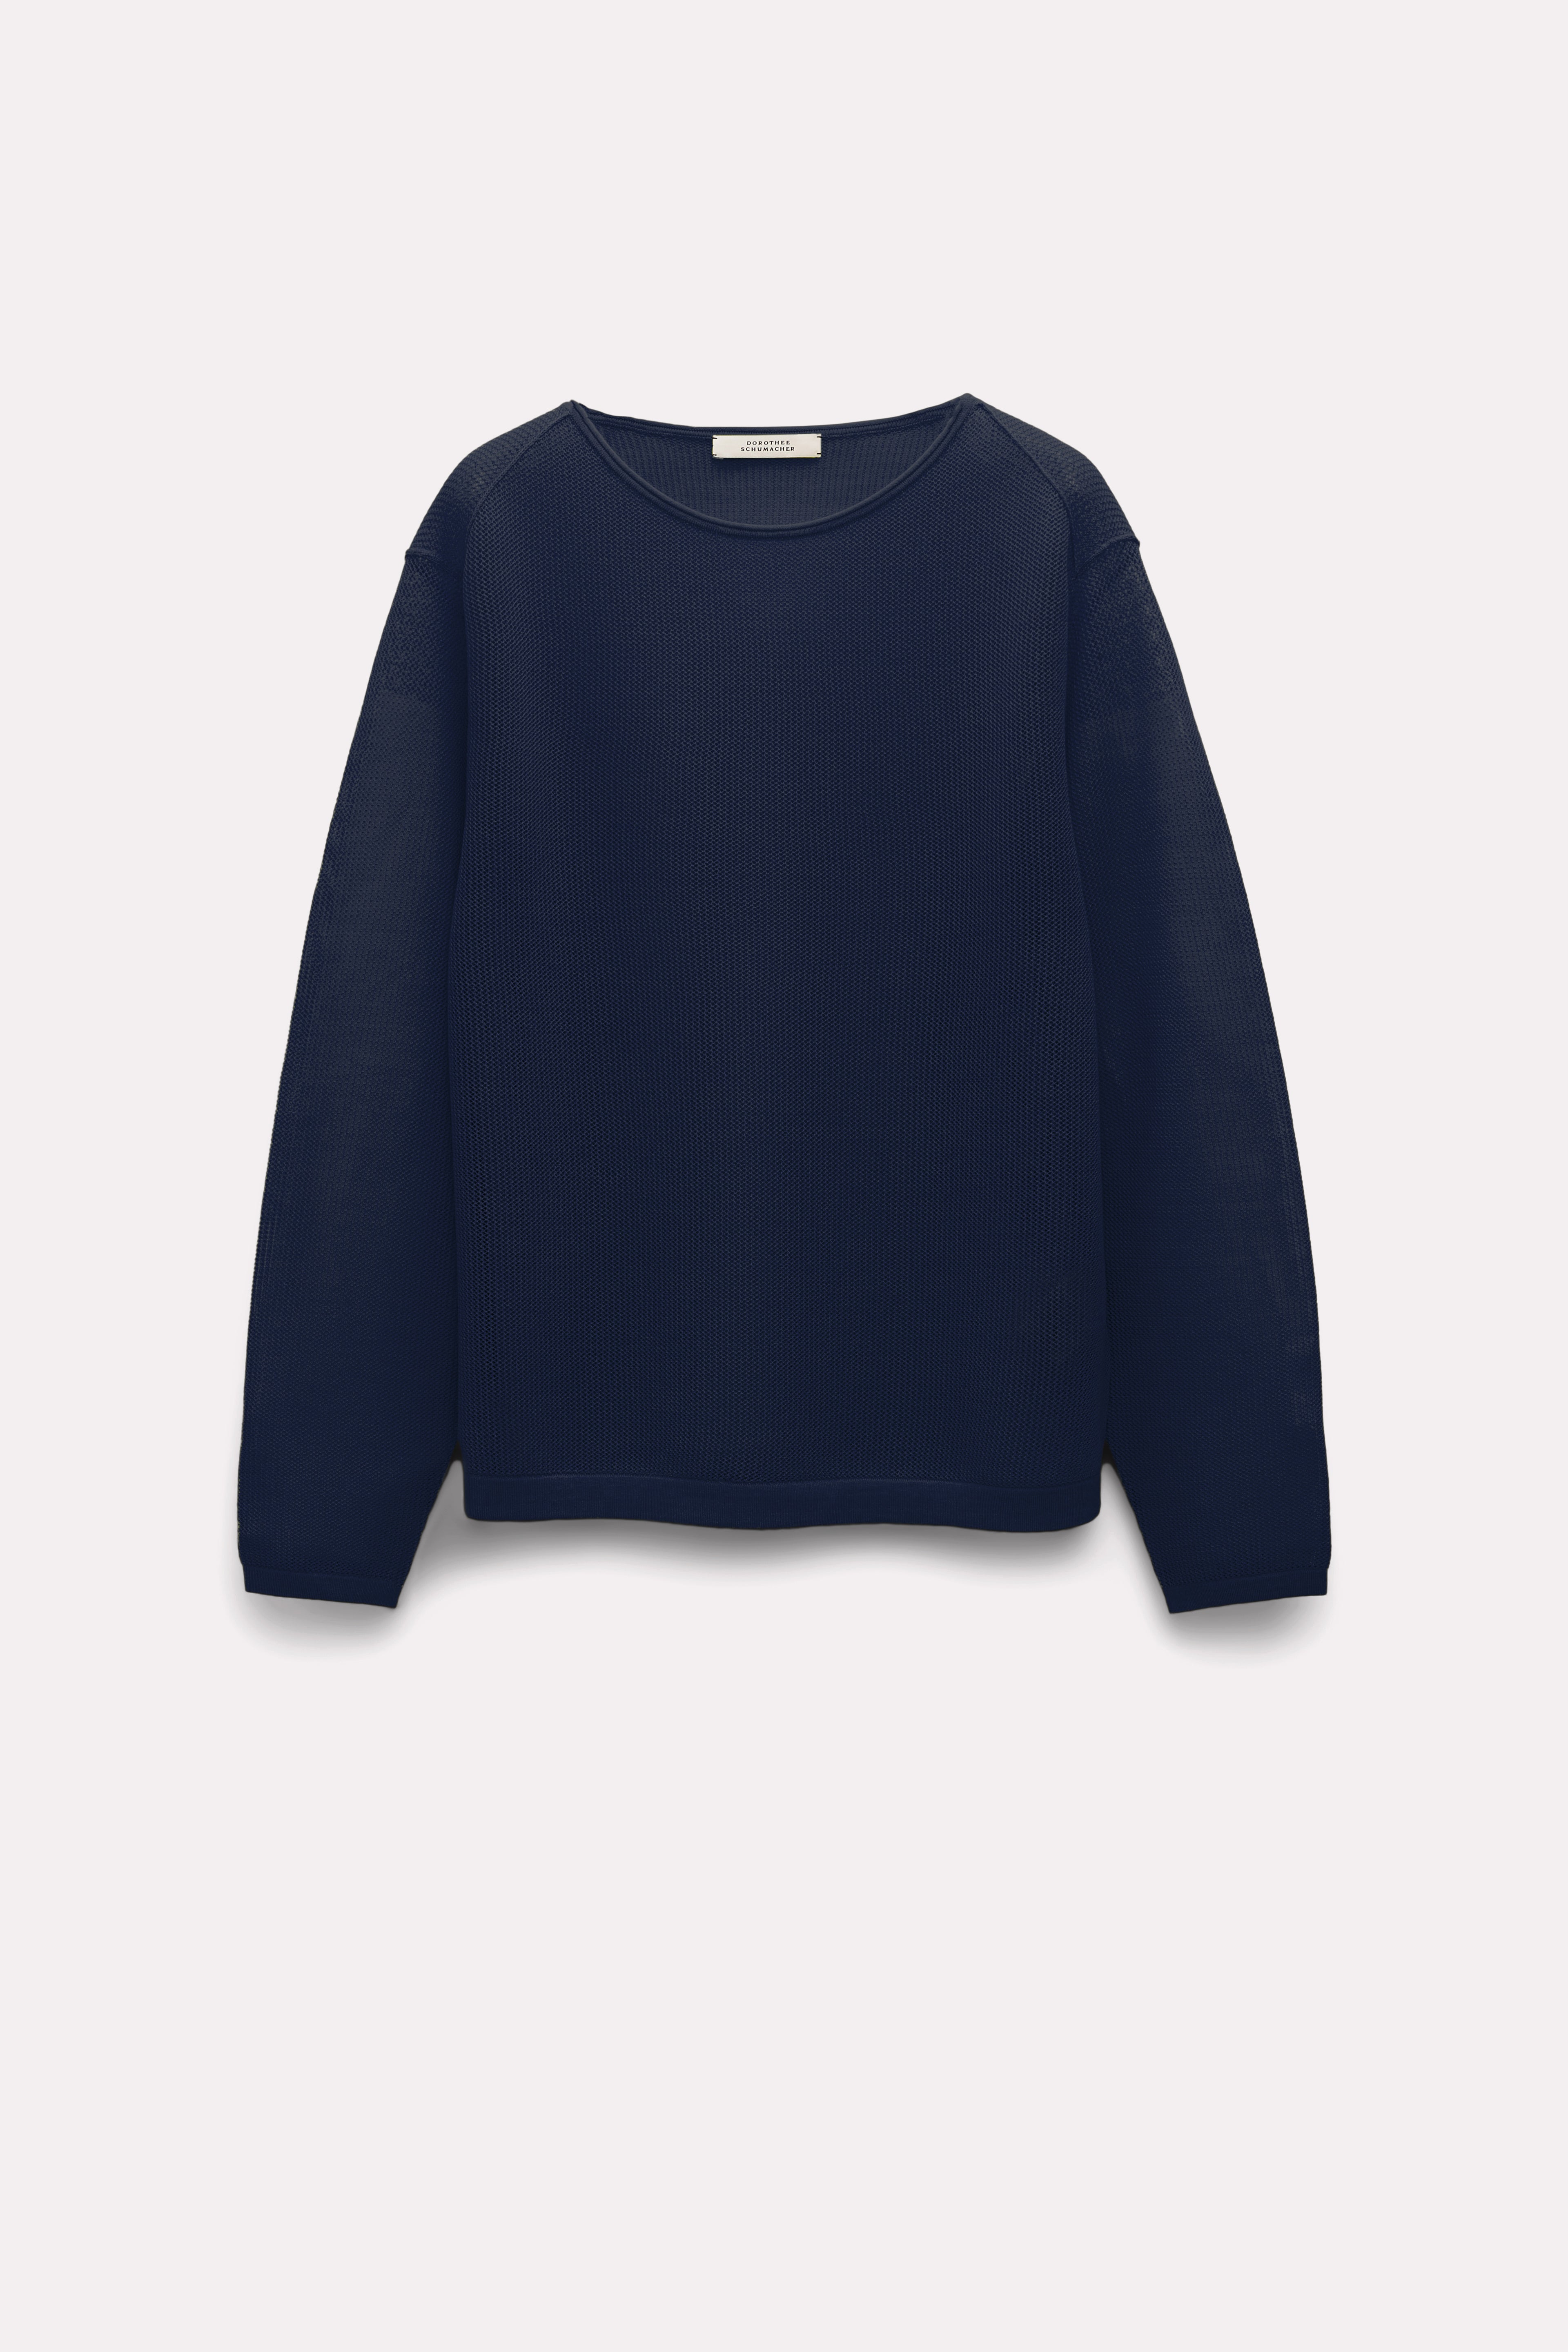 Dorothee-Schumacher-OUTLET-SALE-ESSENTIAL-EASE-pullover-Strick-ARCHIVE-COLLECTION_60e15848-974d-4bbf-b456-ed38b1621da8.jpg